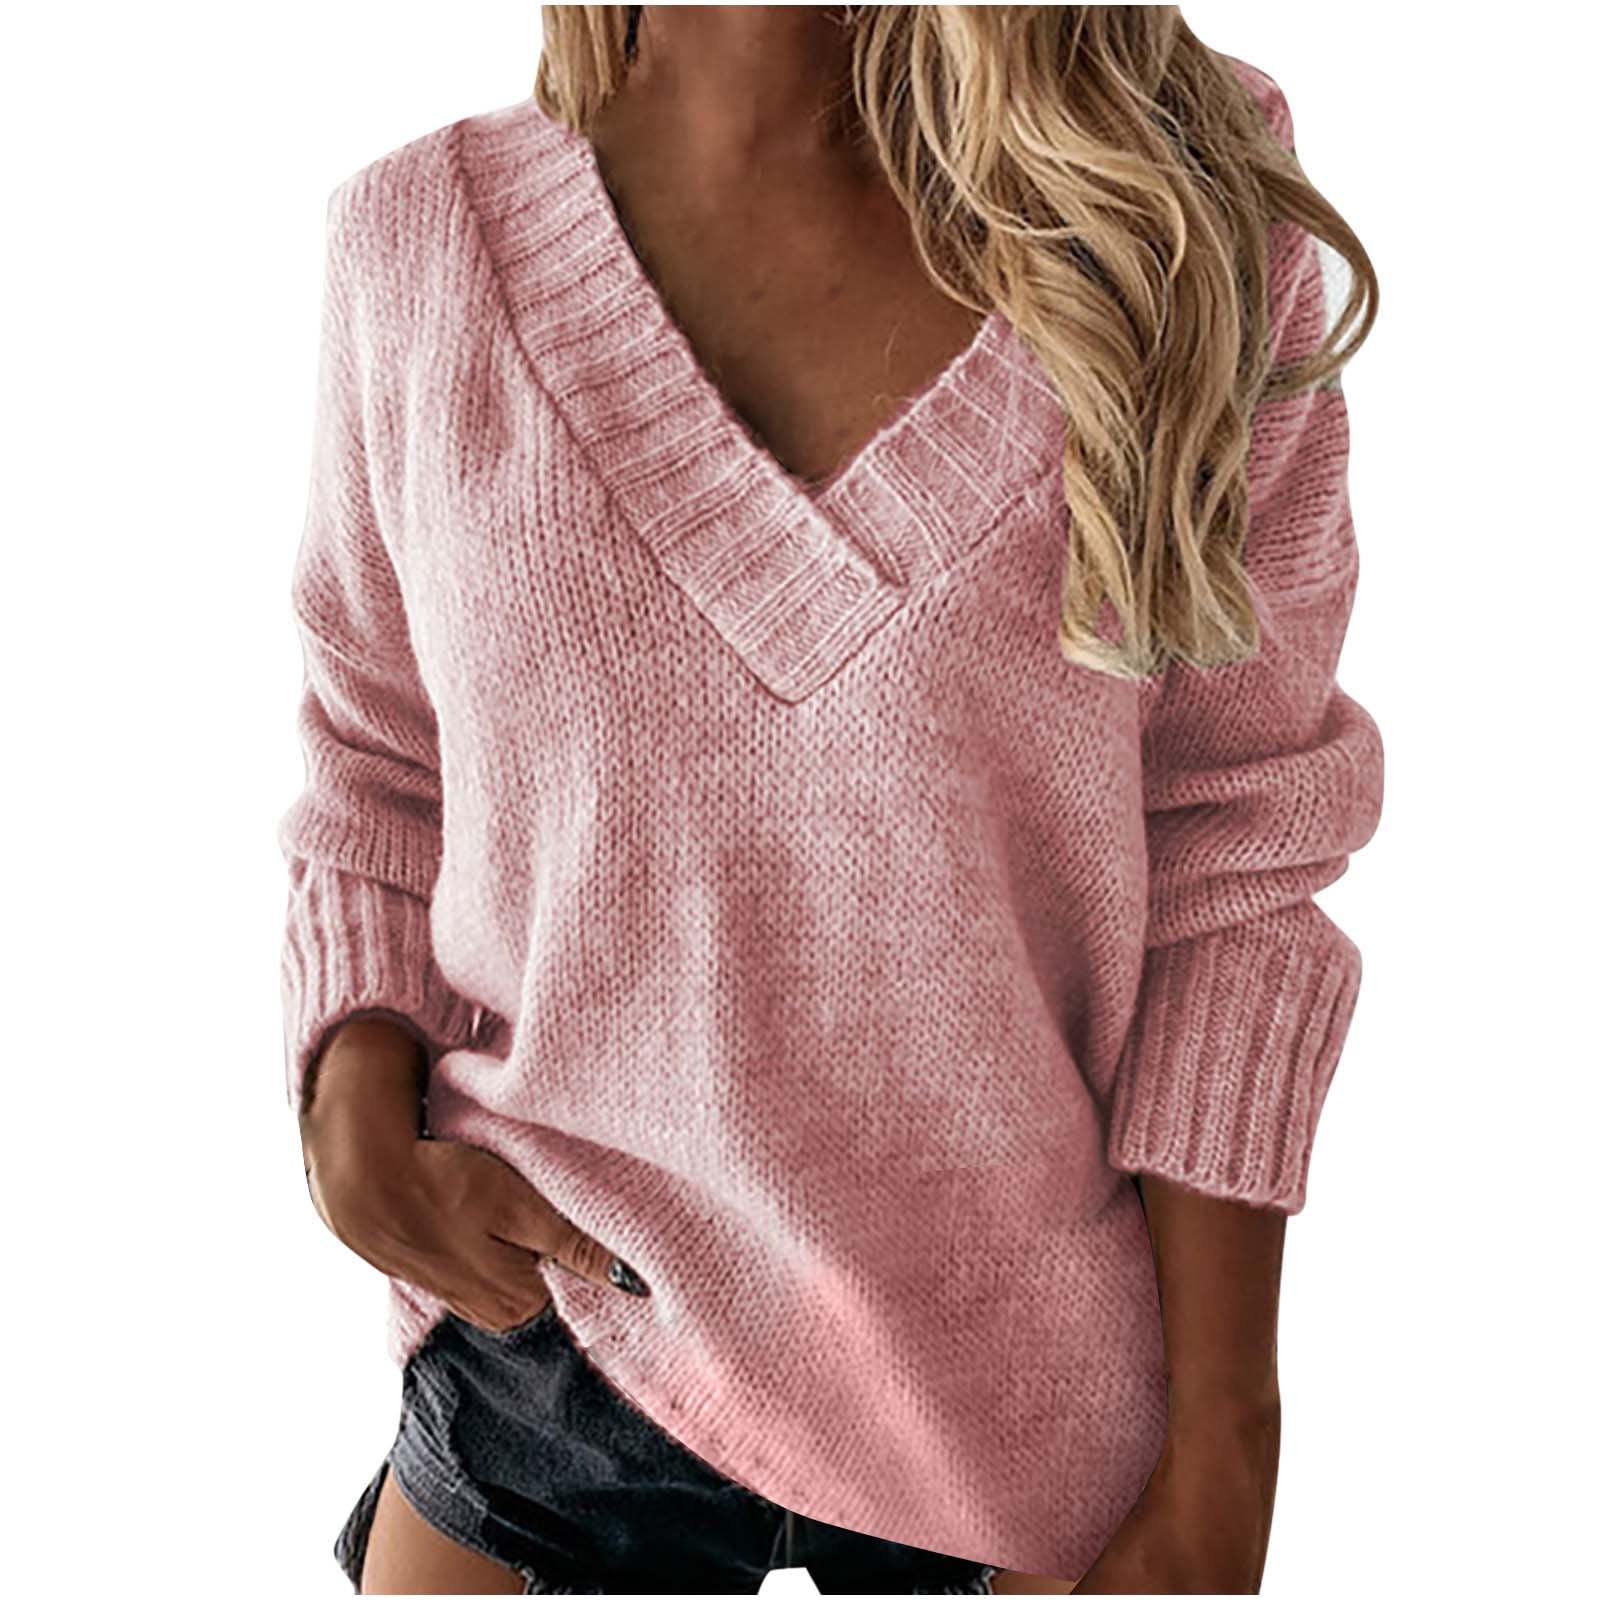 Comfy Cozy Items for You and Your Loved Ones + Cozy Gift Ideas | Outfits  with leggings, Long sweater outfits, Sweaters and leggings